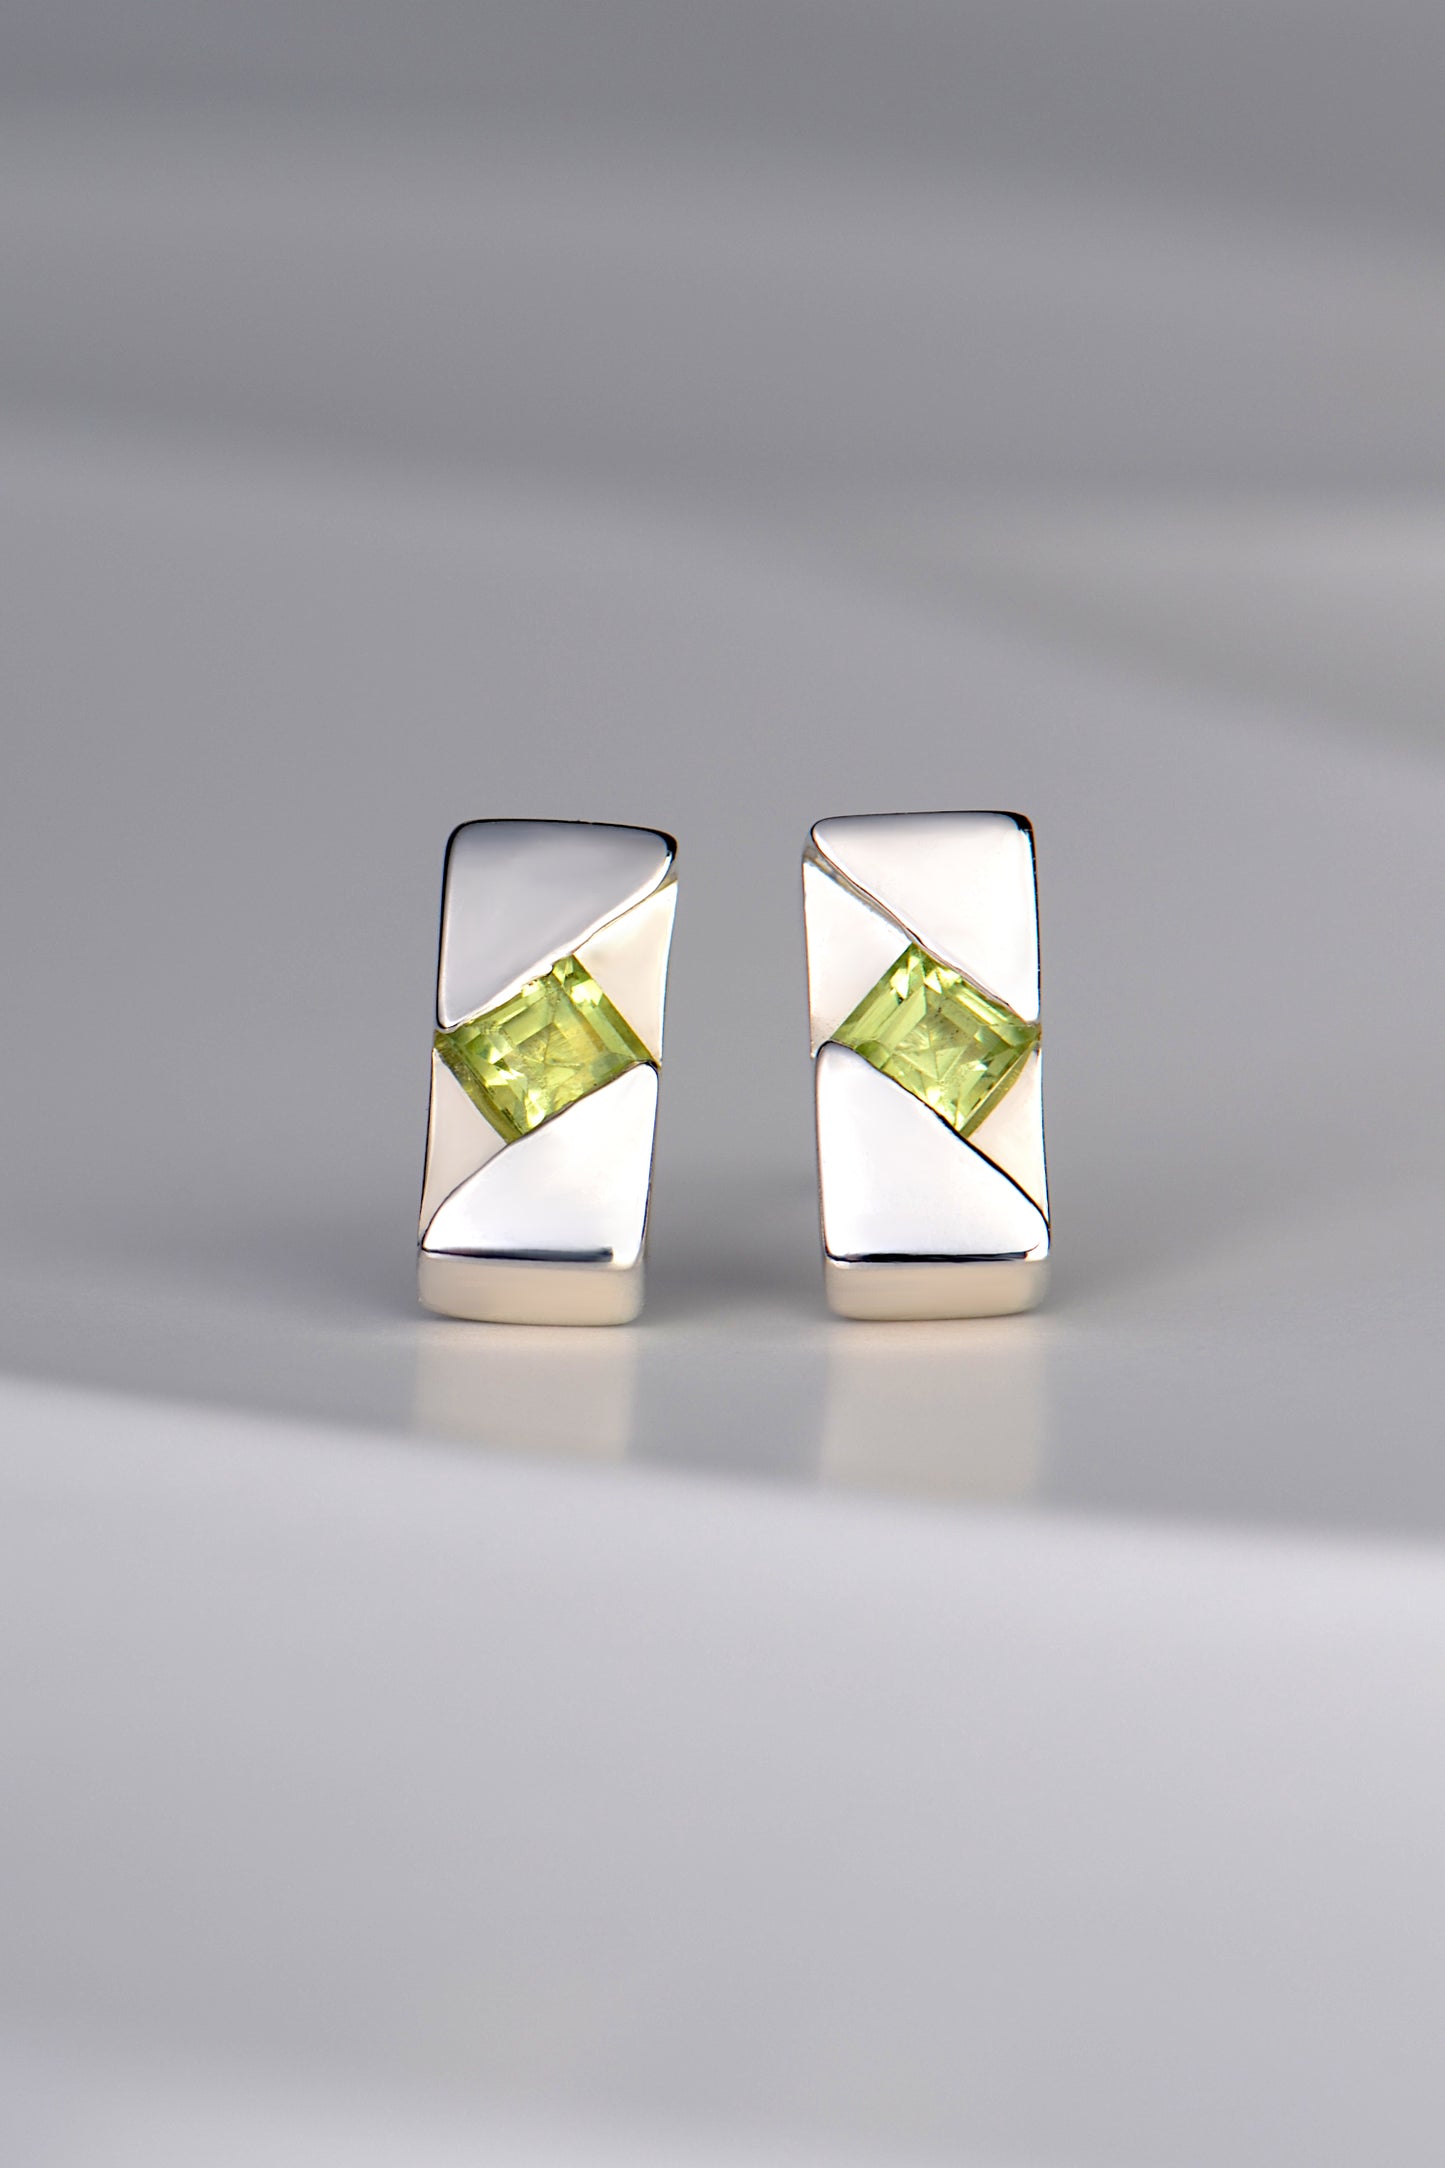 rectangular silver handmade earrings set with a square peridot